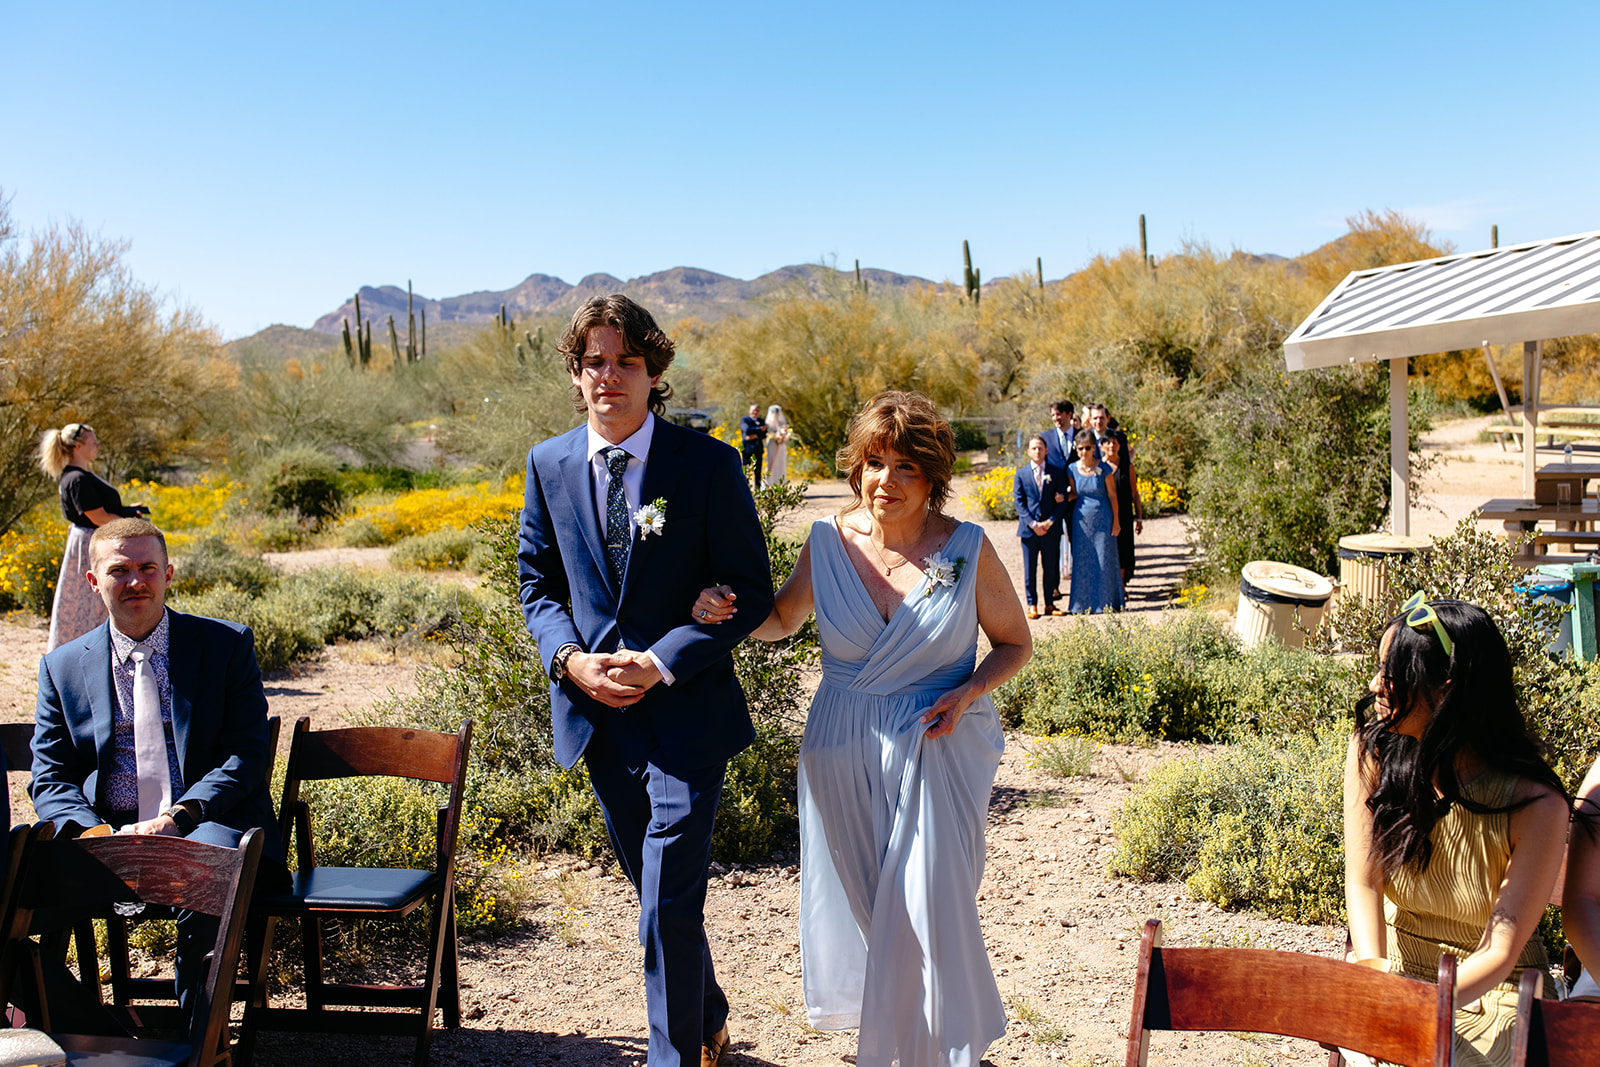 A groomsman and a woman in light blue dress walk down an outdoor aisle at a wedding. Guests are seated on either side, and desert scenery with cacti and mountains is in the background at a garden party wedding